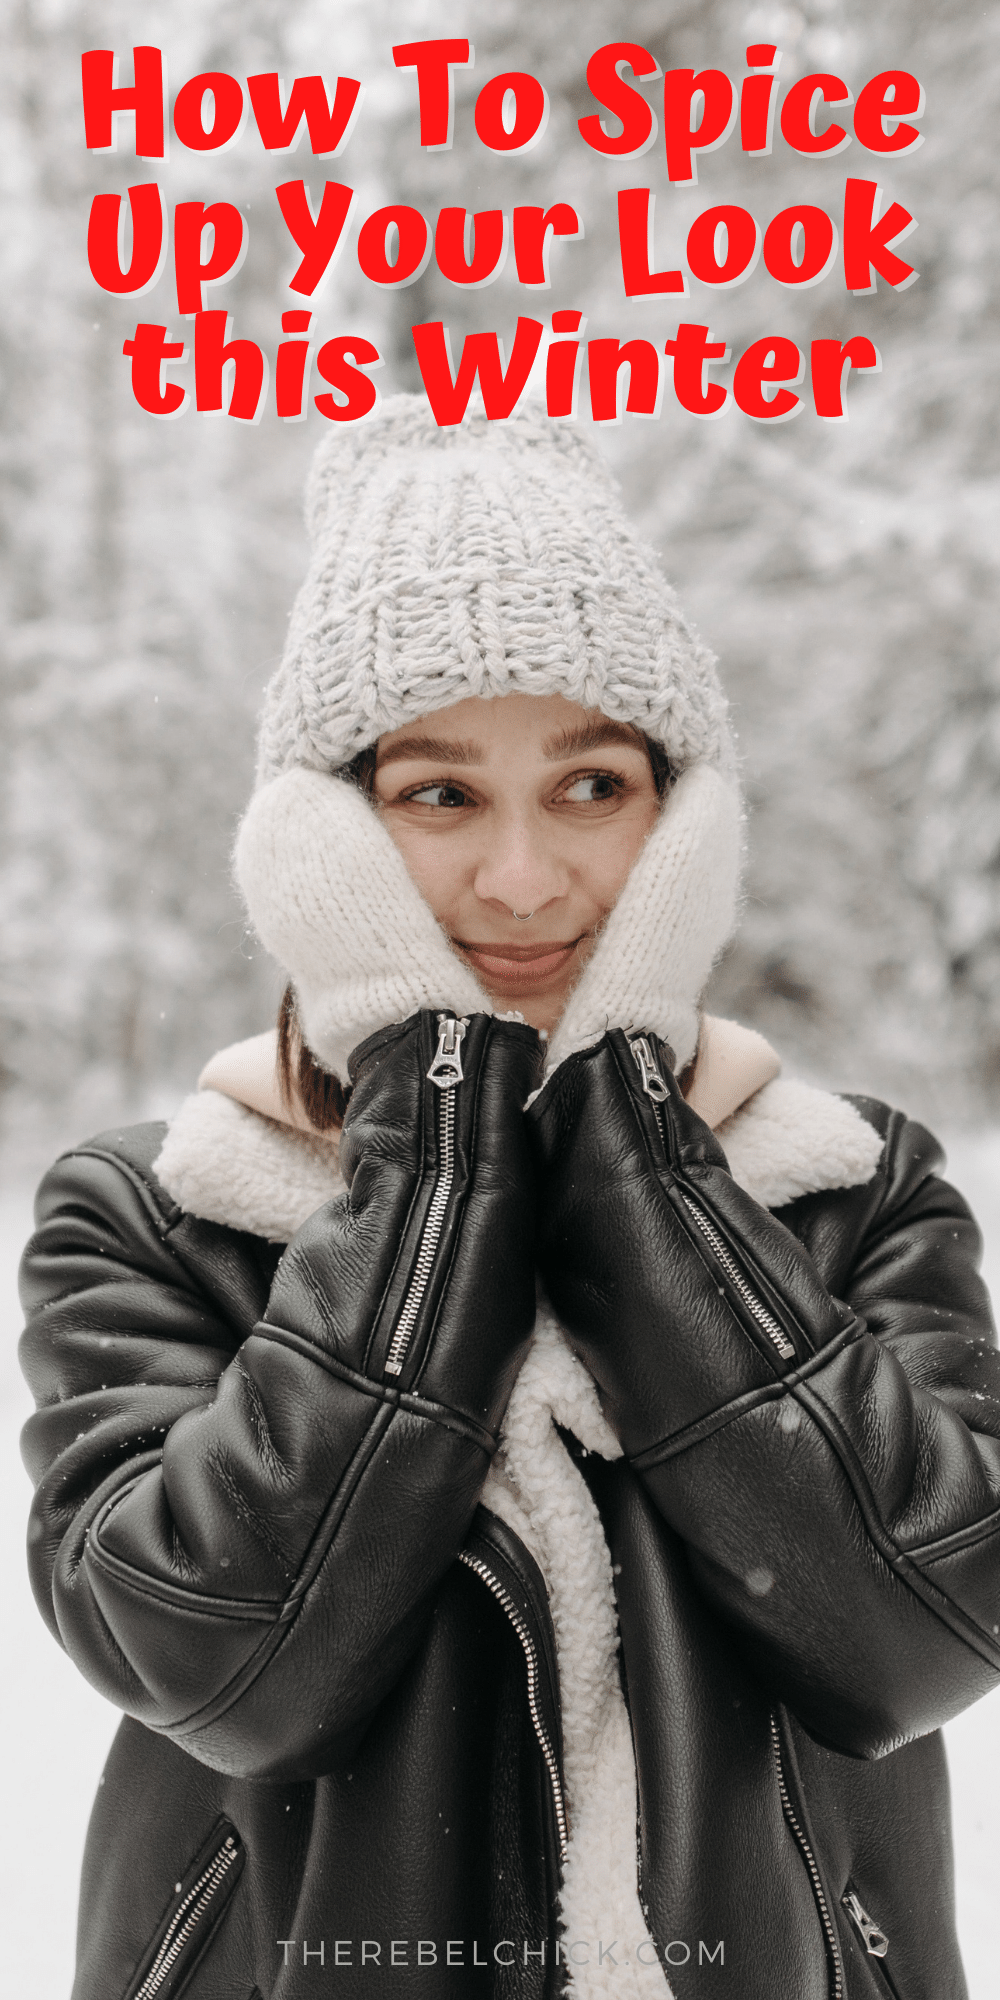 How To Spice Up Your Look This Winter